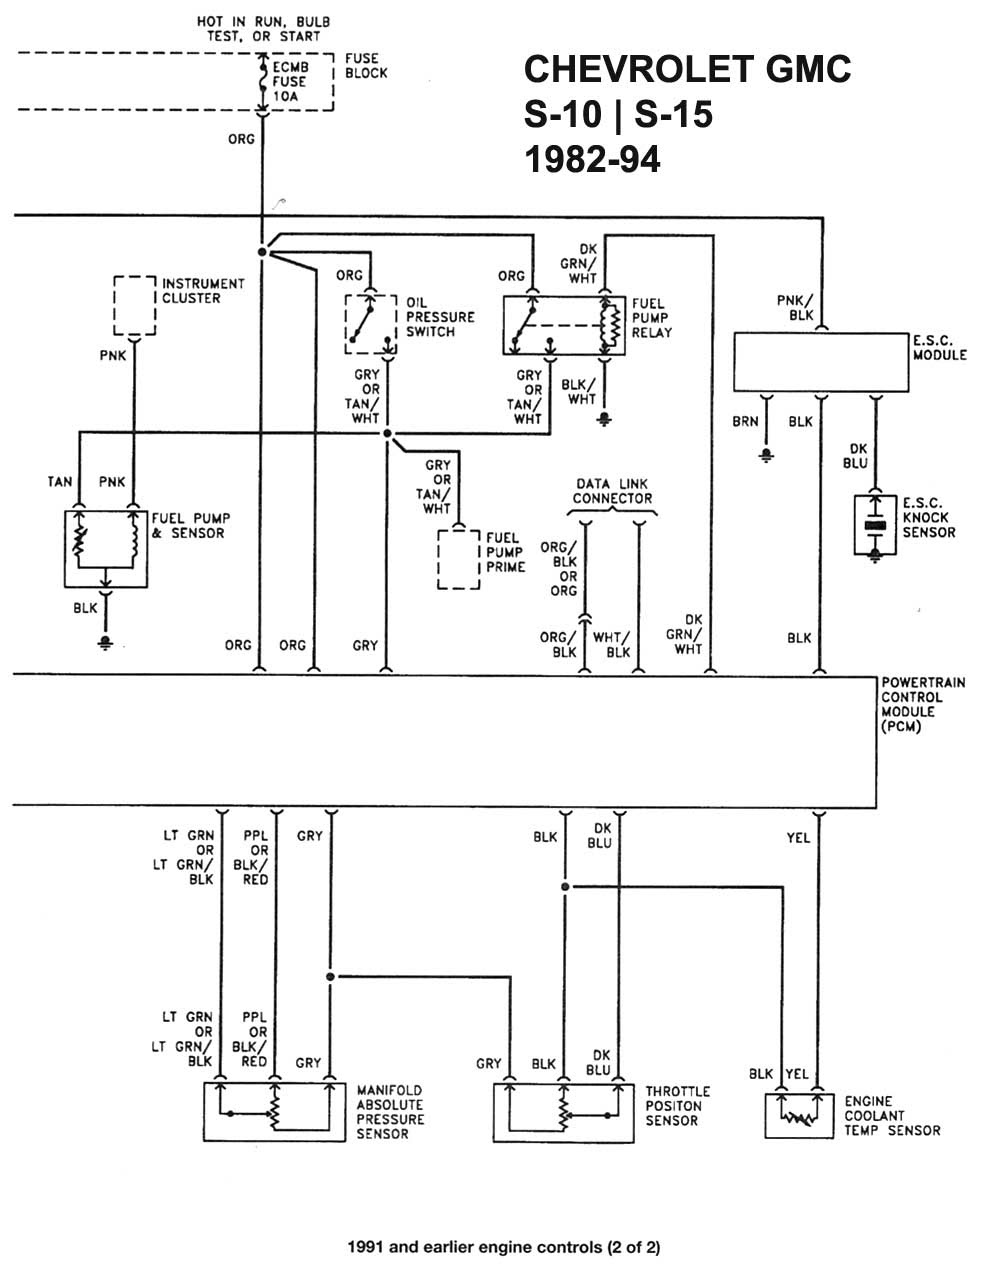 25 Chevy S 10 Engine Diagram - Wiring Database 2020